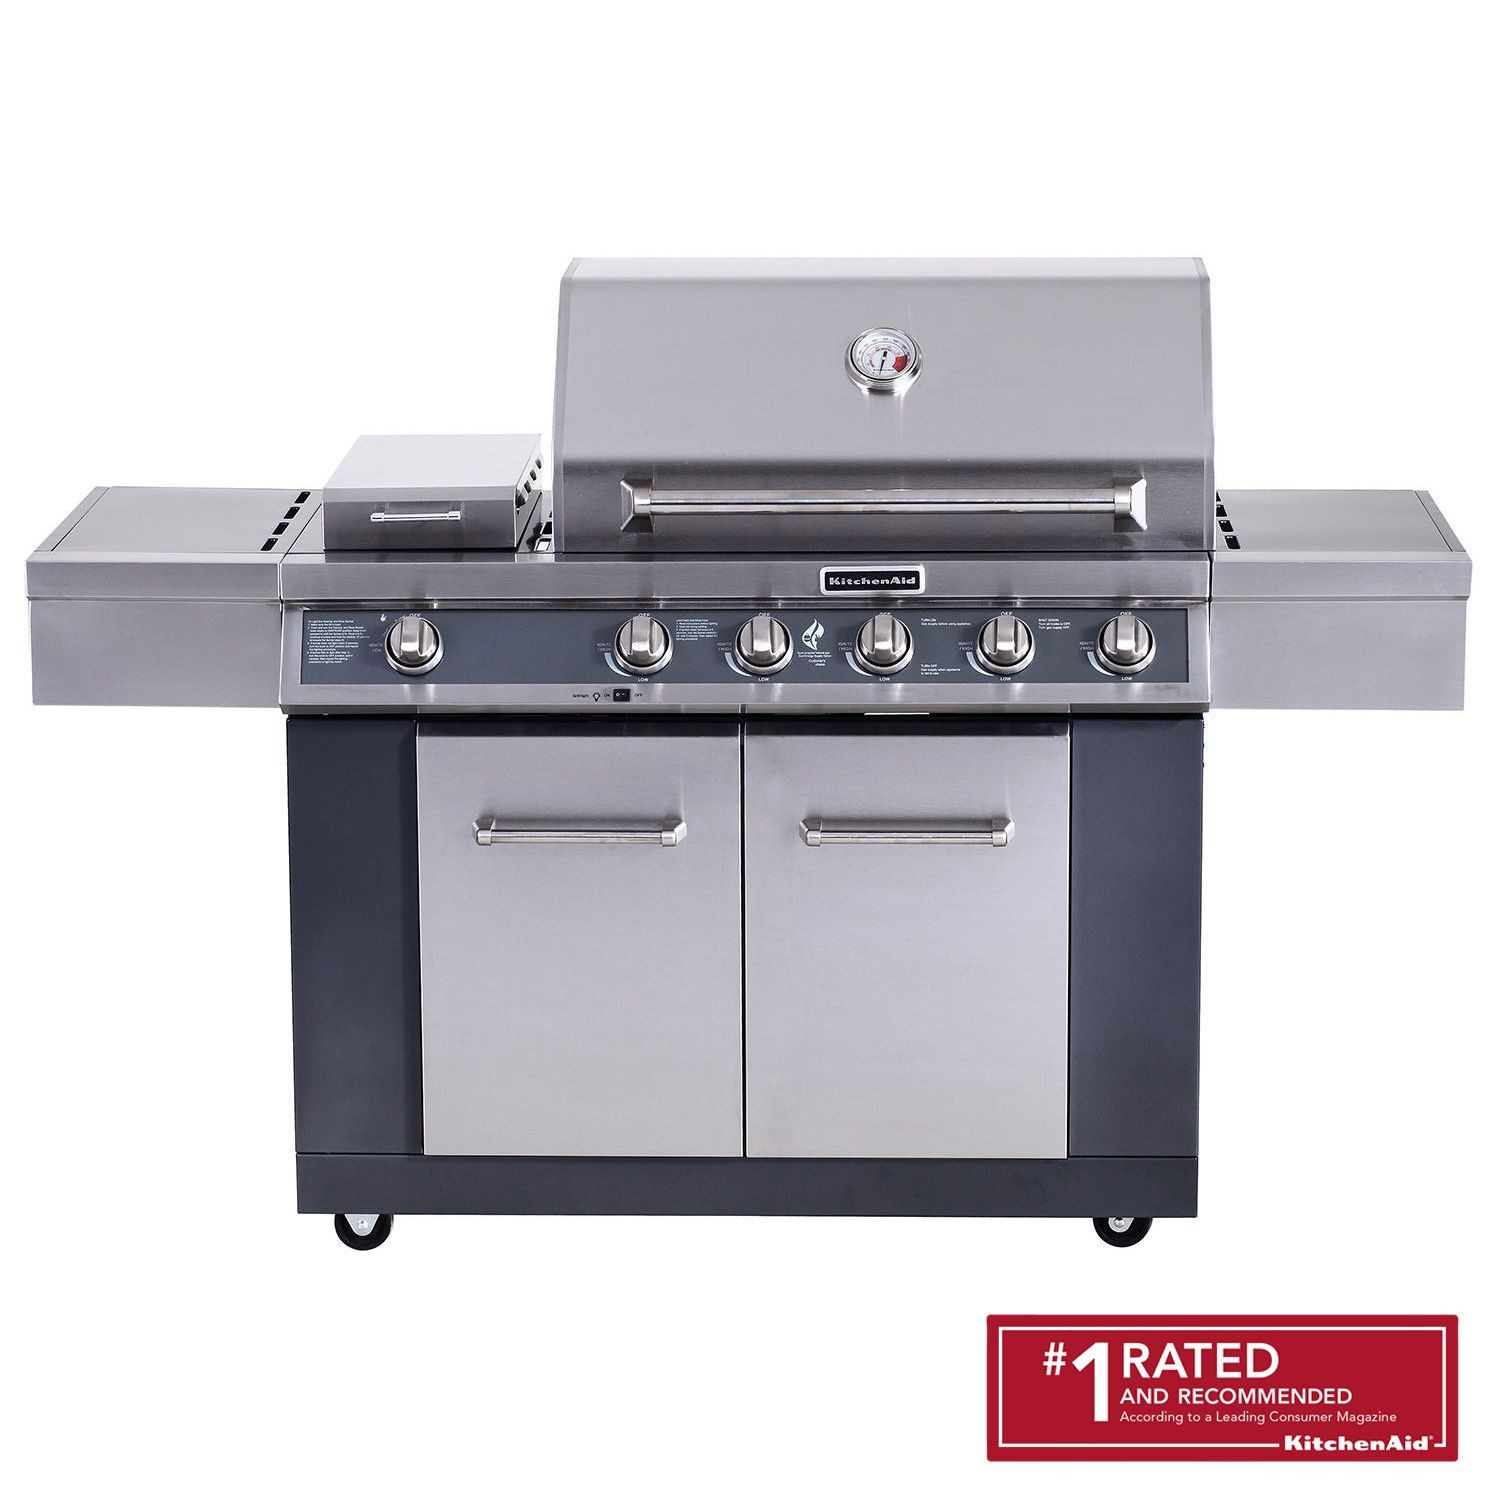 Sam'S Club Outdoor Kitchen
 32" KitchenAid Outdoor Gas Grill 1 Rated Sam s Club